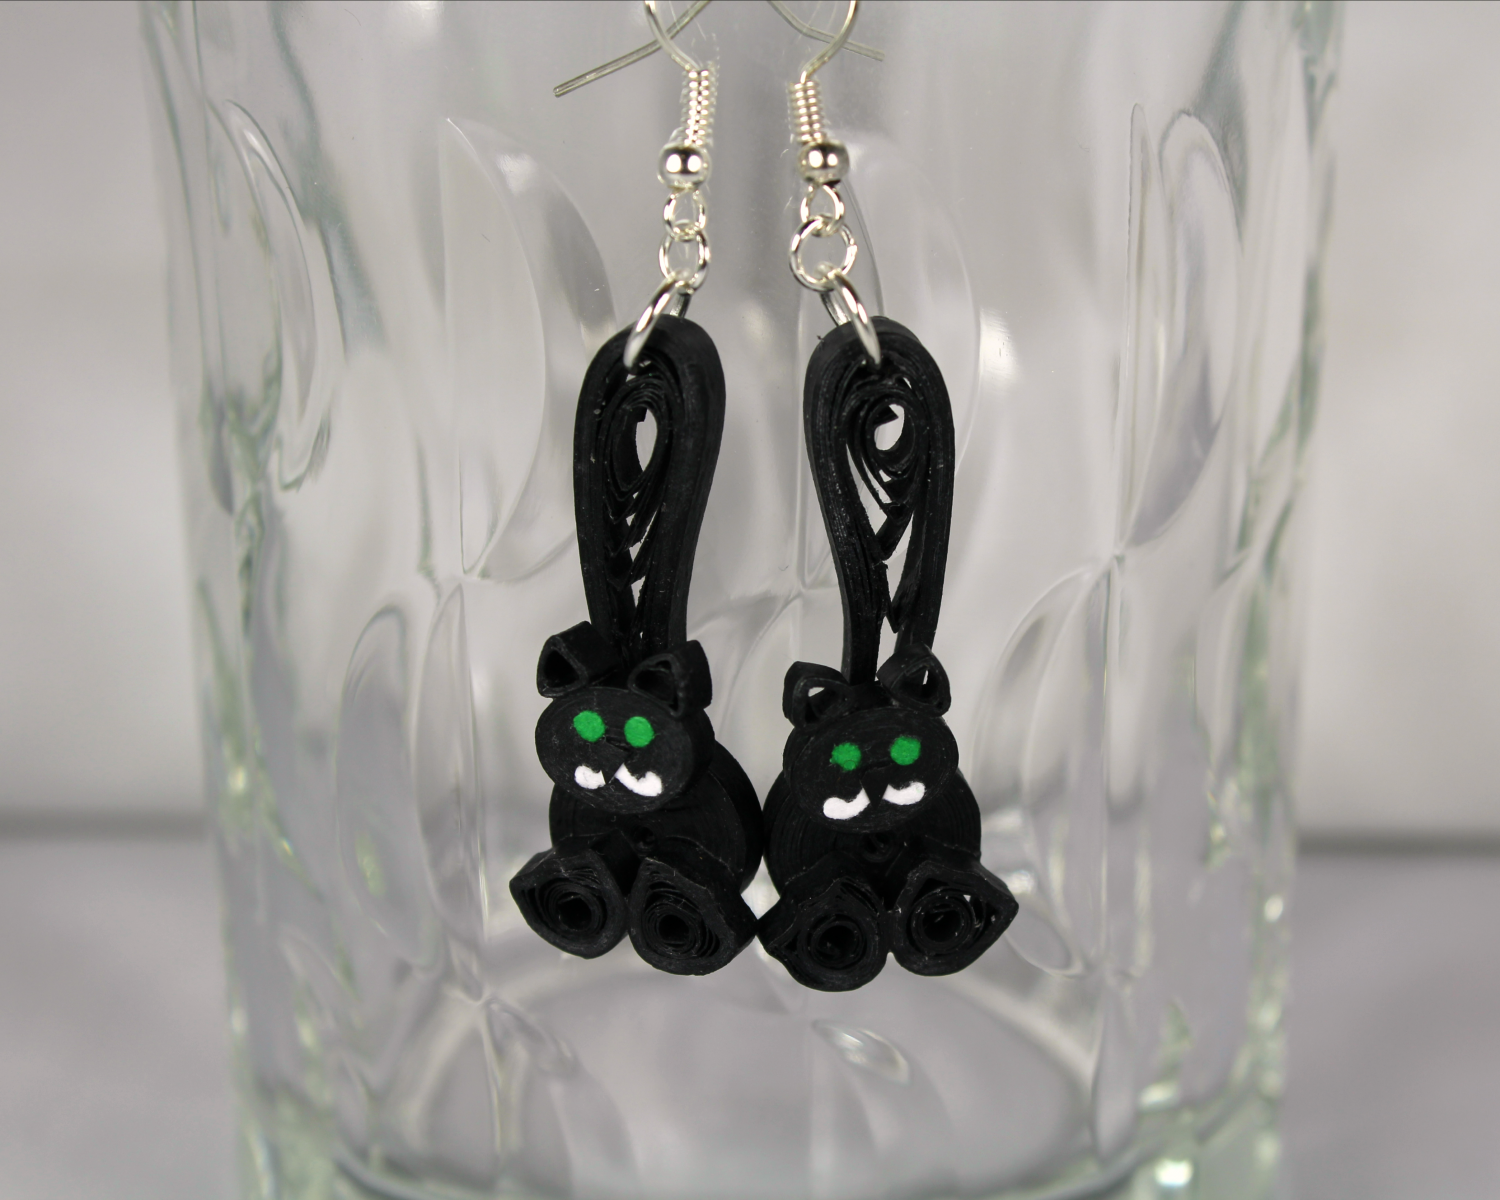 Black Cat Paper Quilled Earrings for Halloween Costume